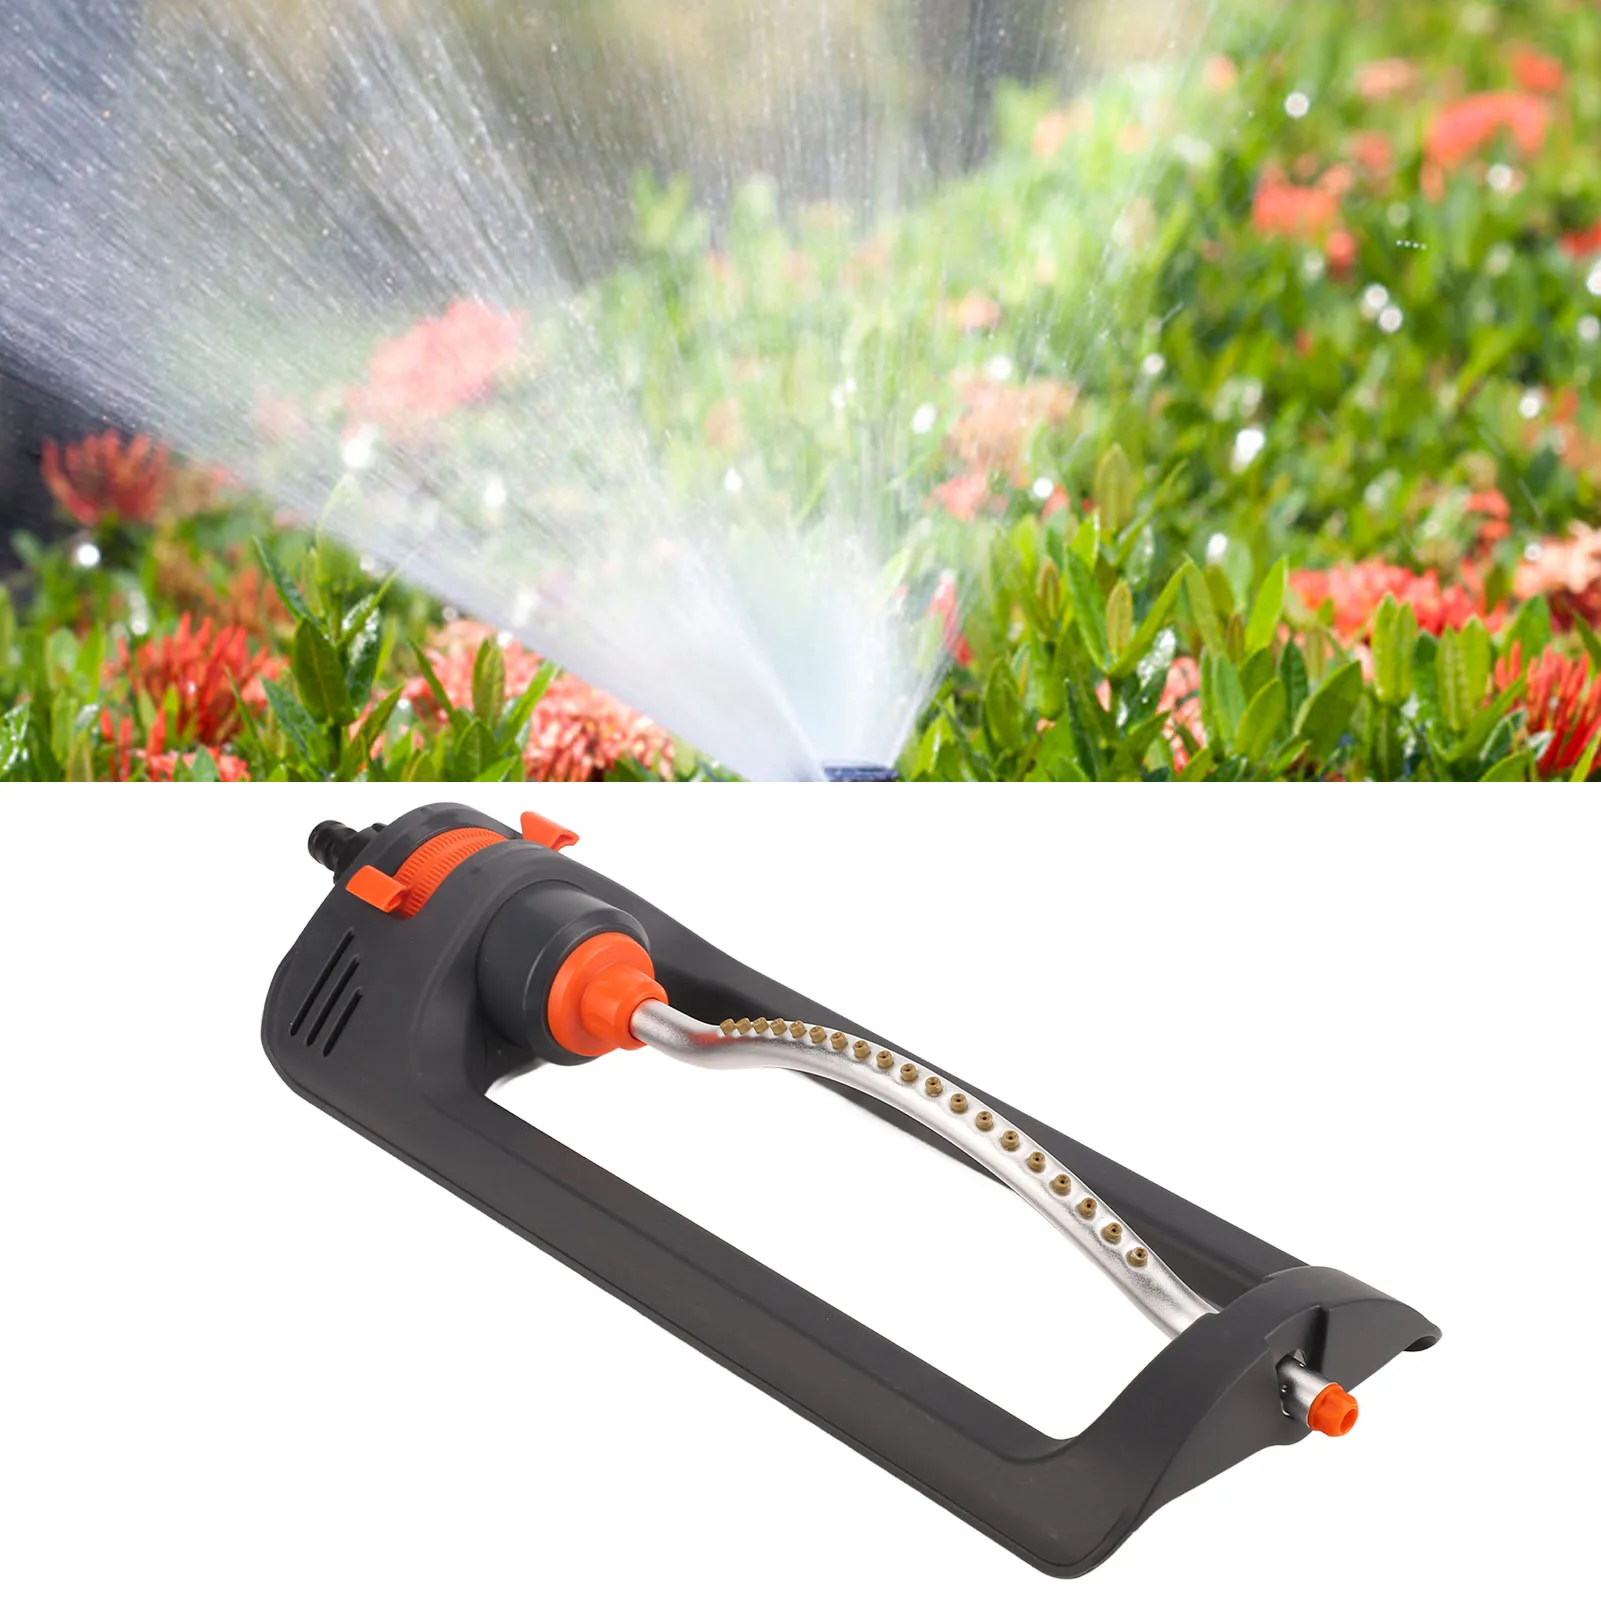 

Automatic Oscillating Lawn Sprinkler 19 Hole 4 Modes Watering Device For Home Garden Agricultural Irrigation